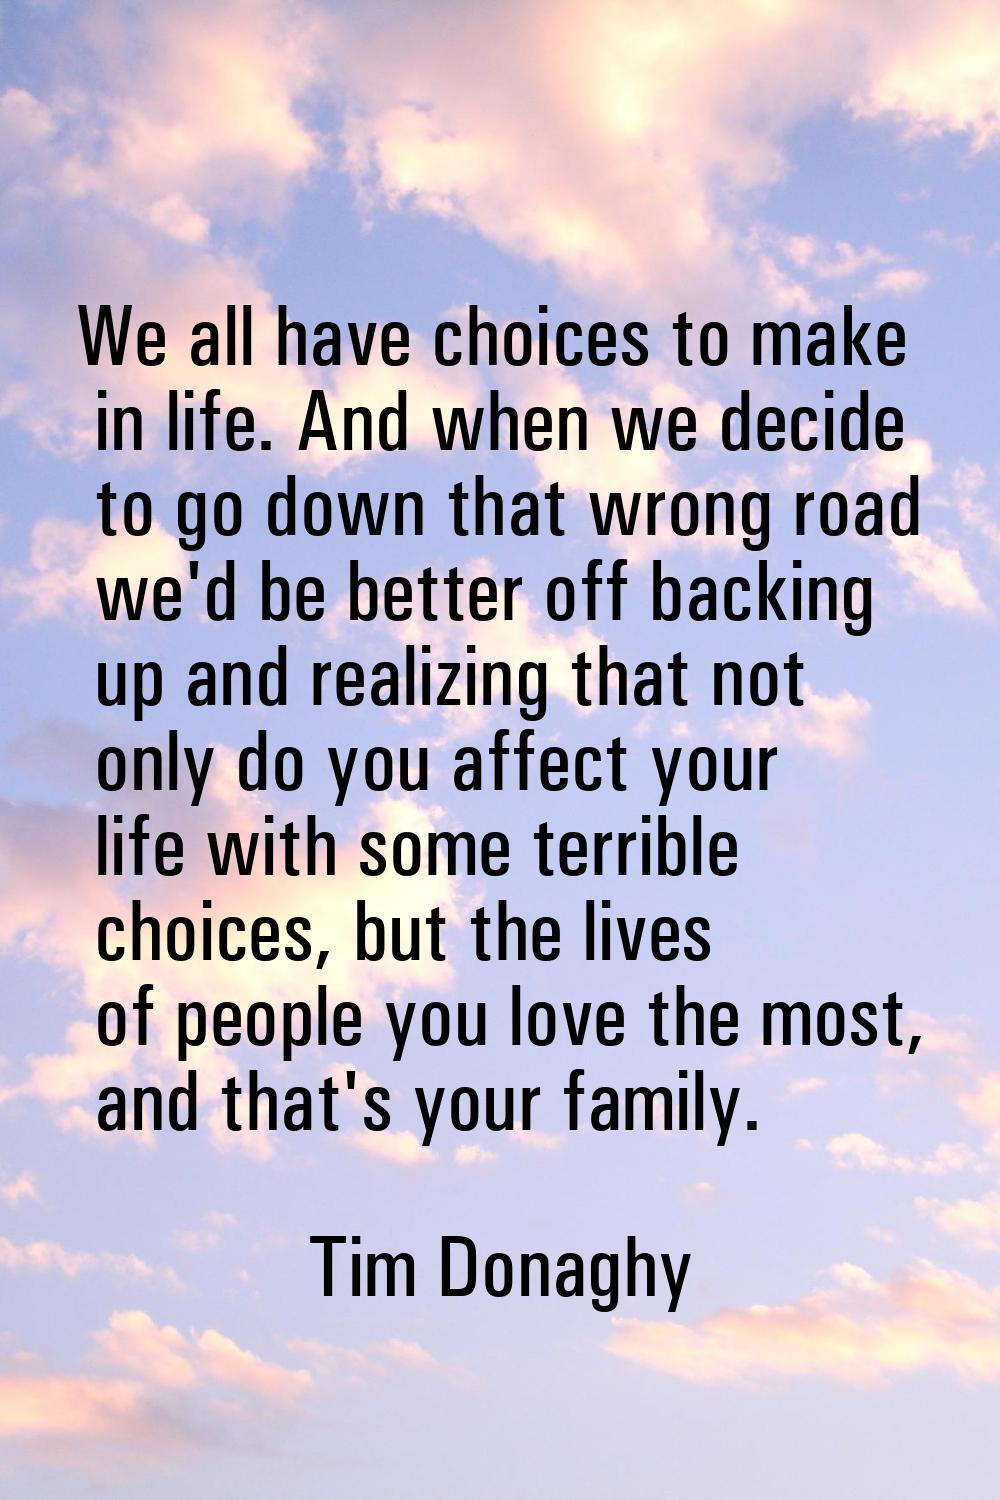 We all have choices to make in life. And when we decide to go down that wrong road we'd be better o